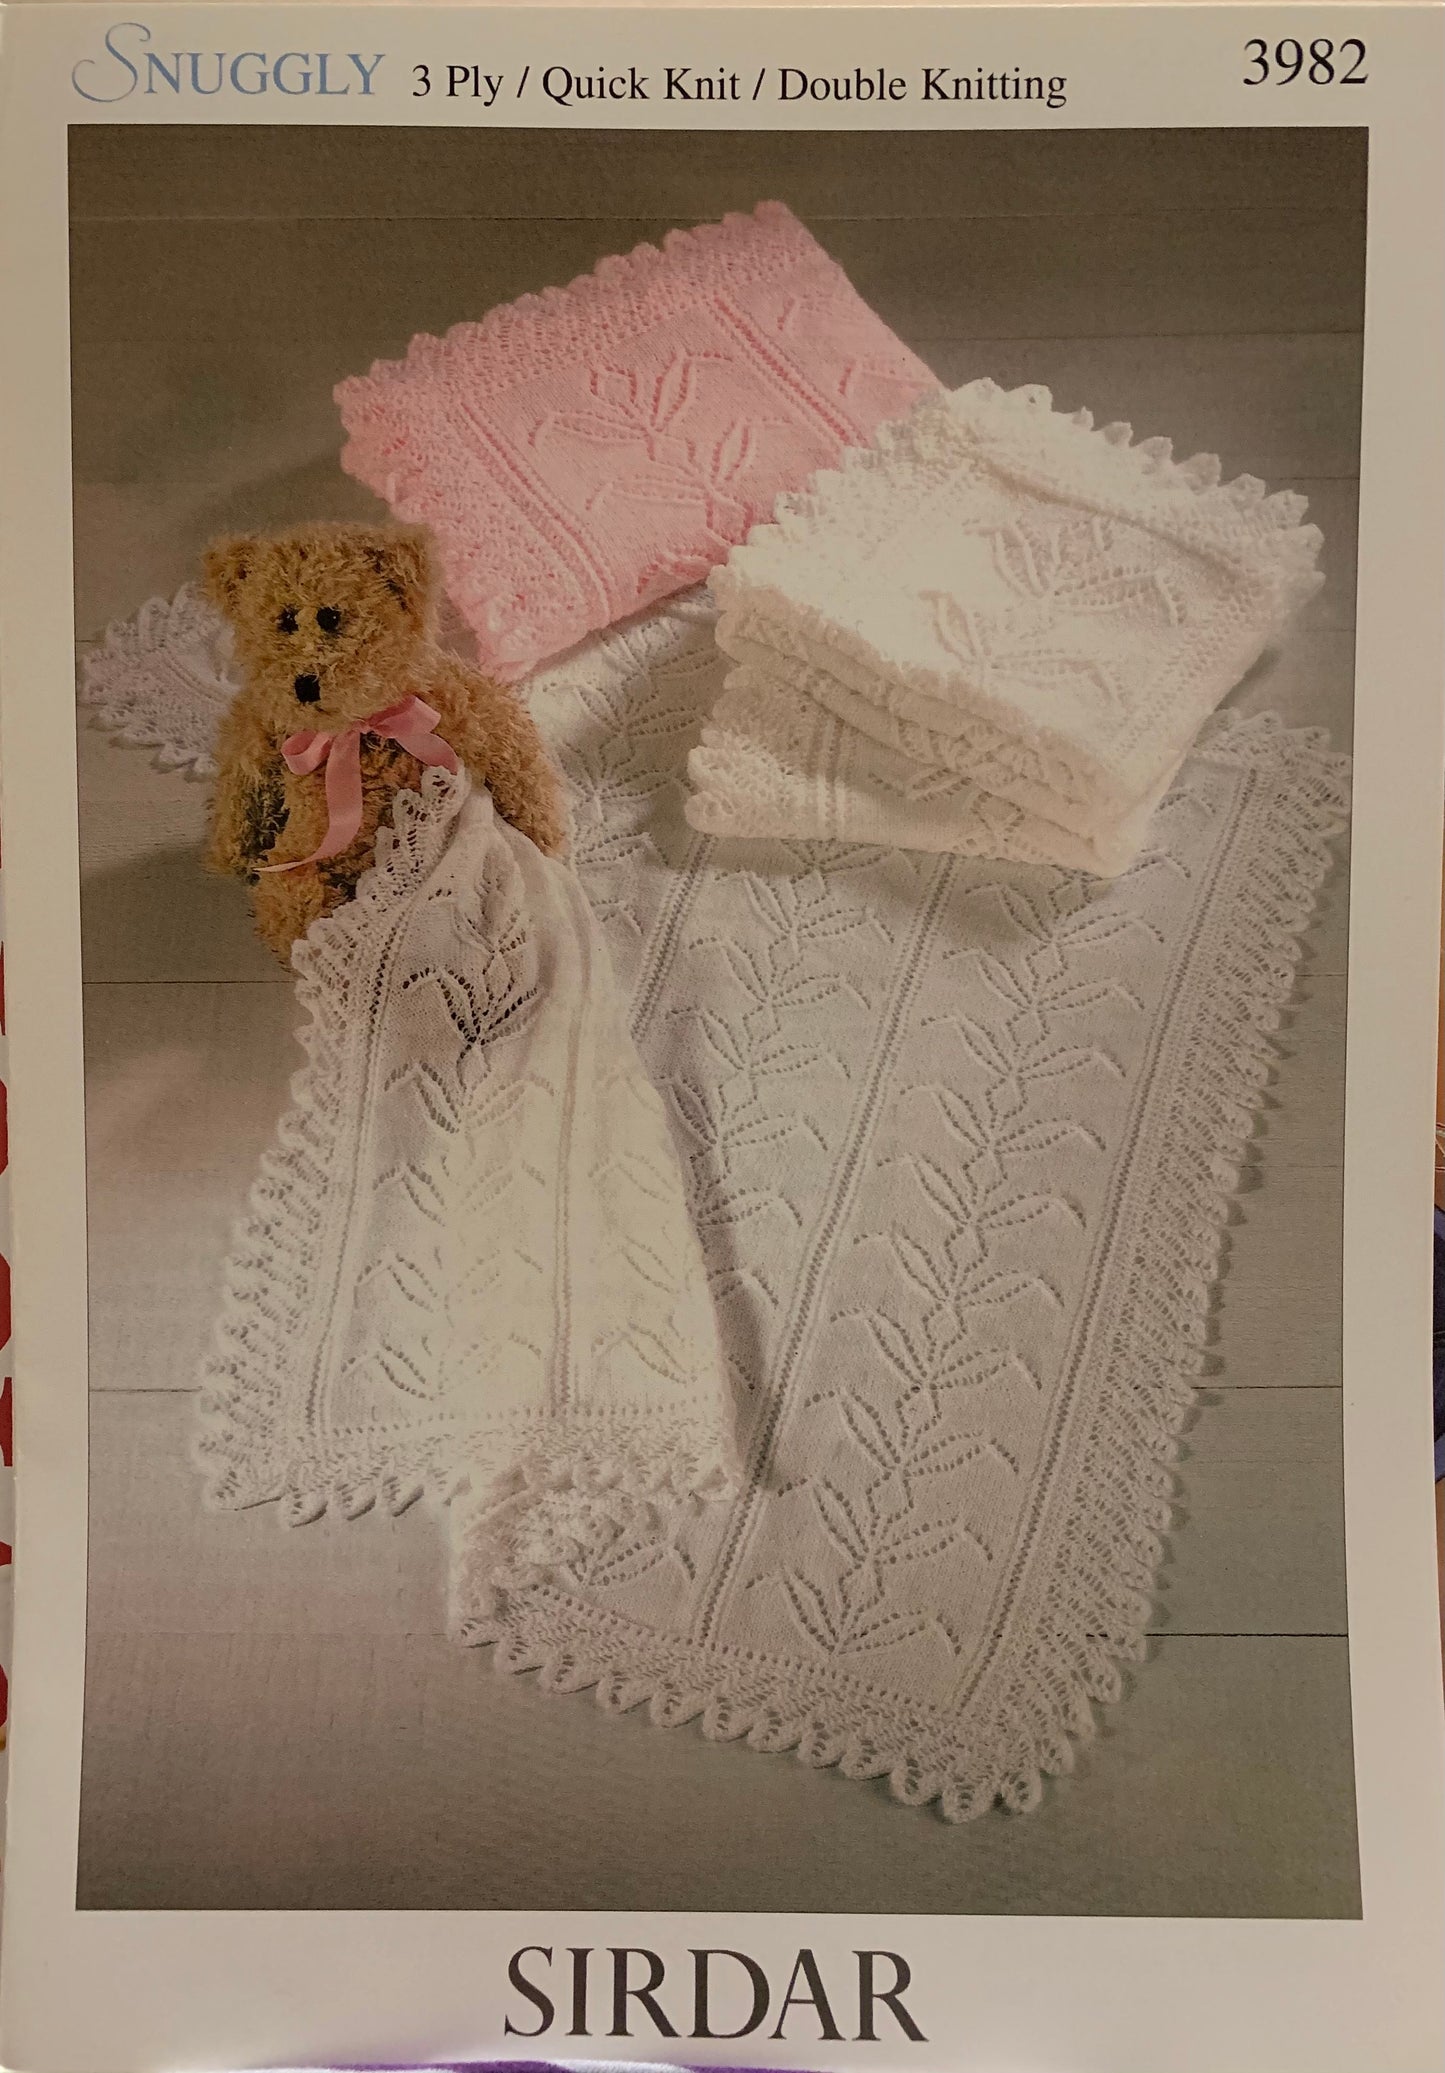 3982 Sirdar Snuggly 3 ply, quick knit and dk baby shawls knitting pattern